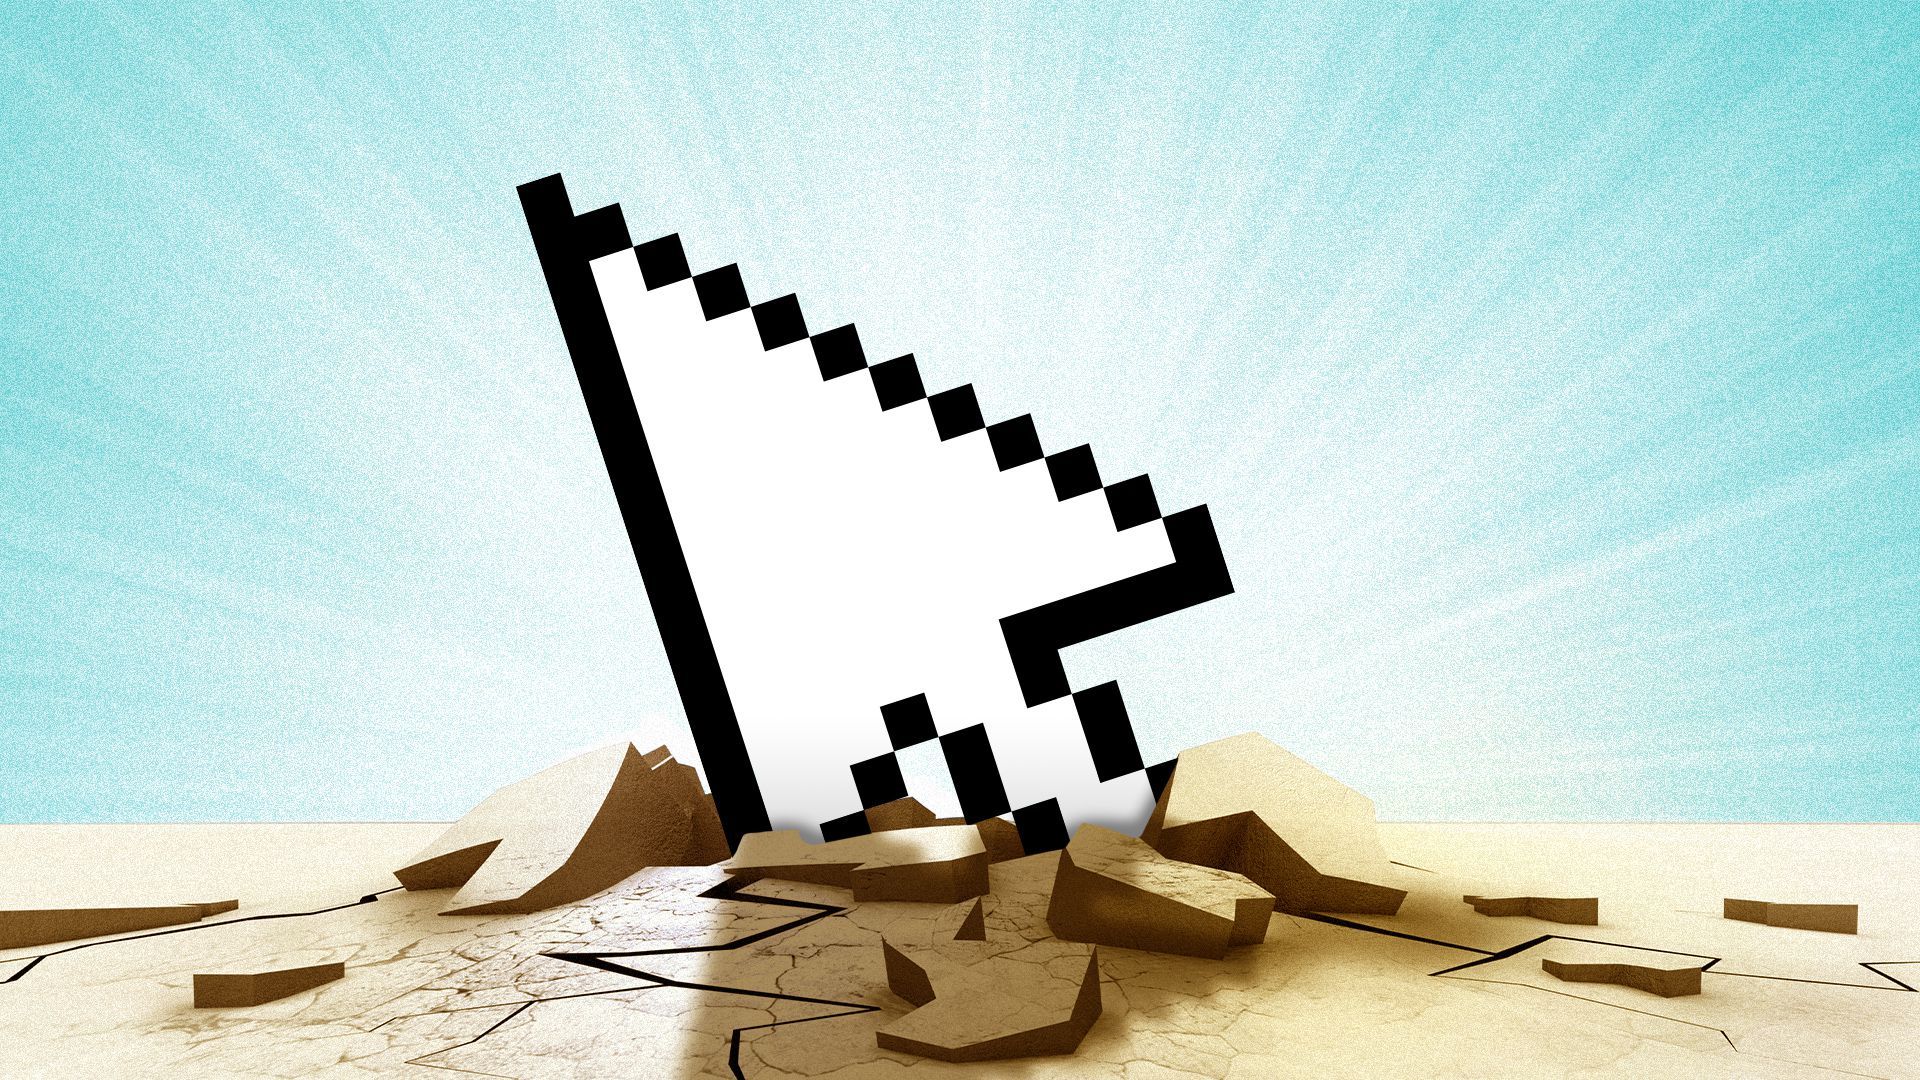 Illustration of a giant cursor breaking the ground underneath it.   